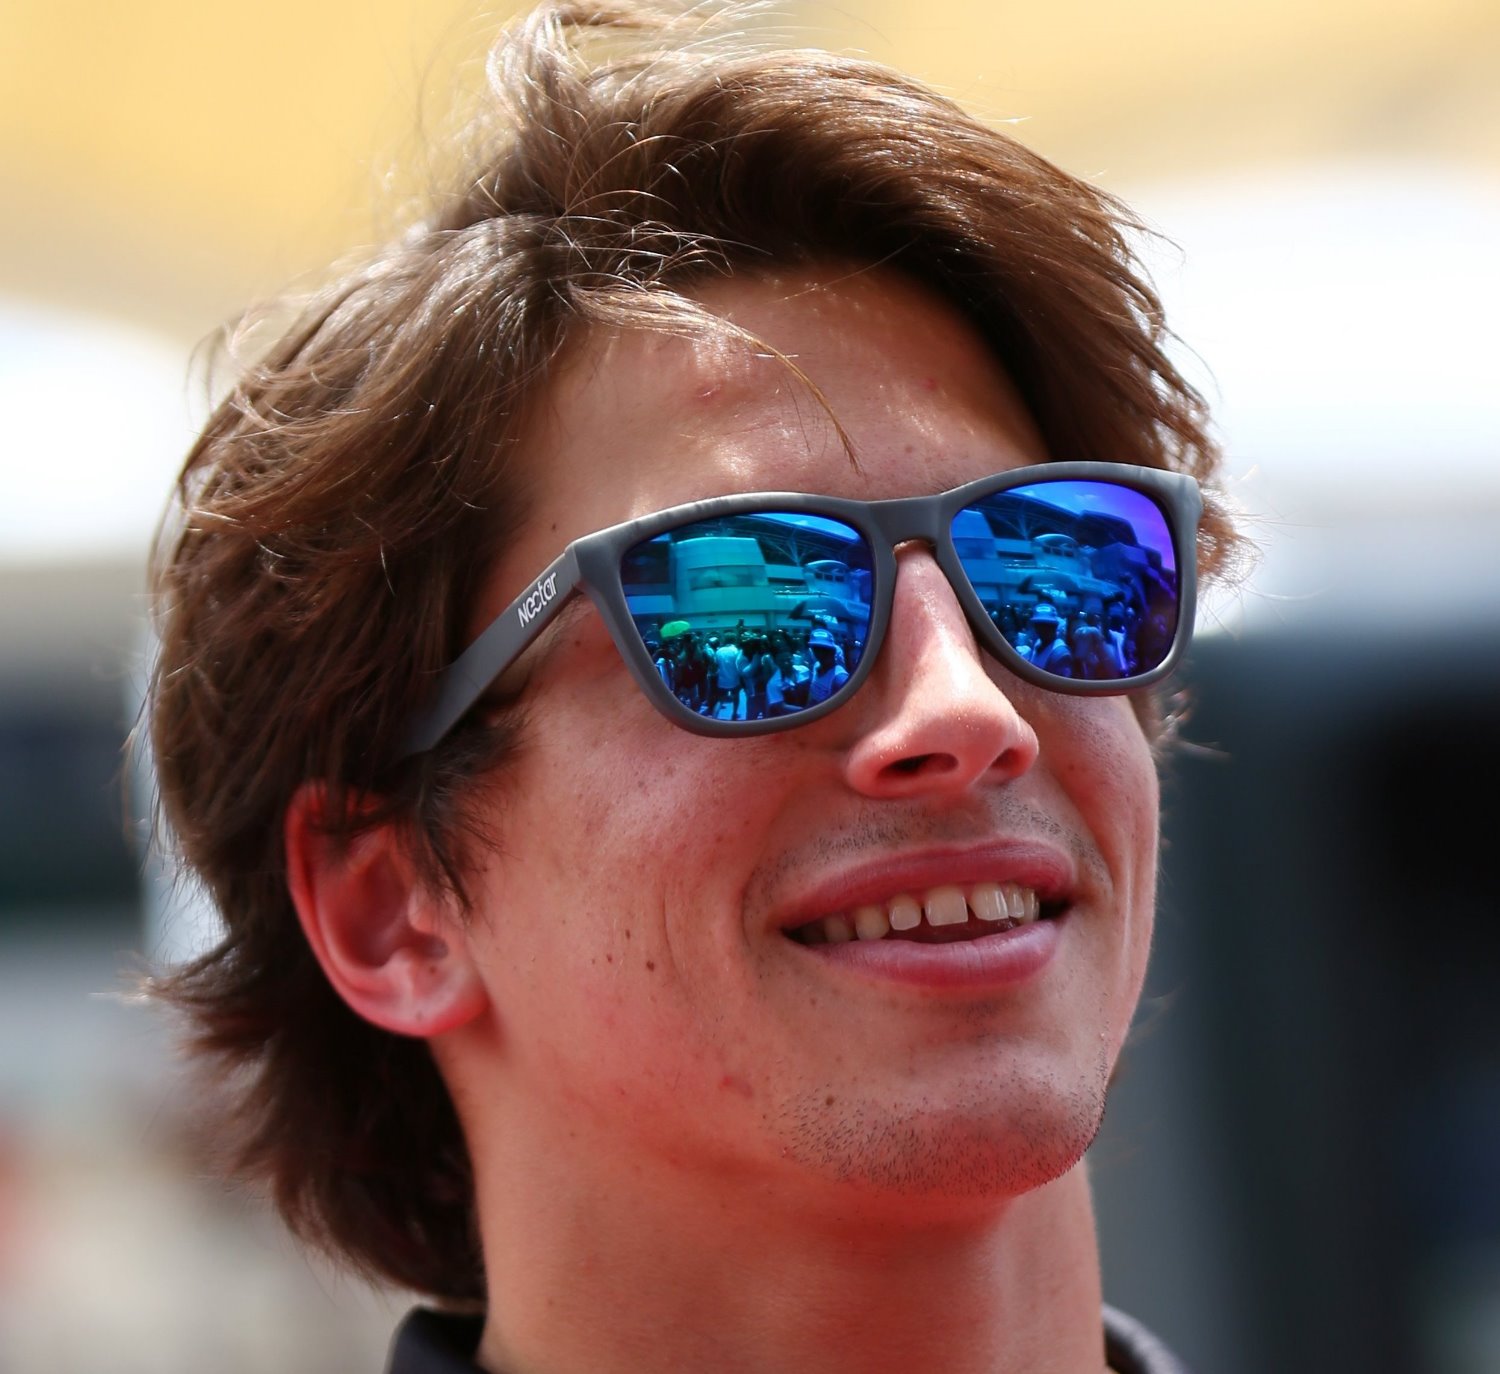 No ride-buyer has brought enough money to kick Merhi out of his Manor ride